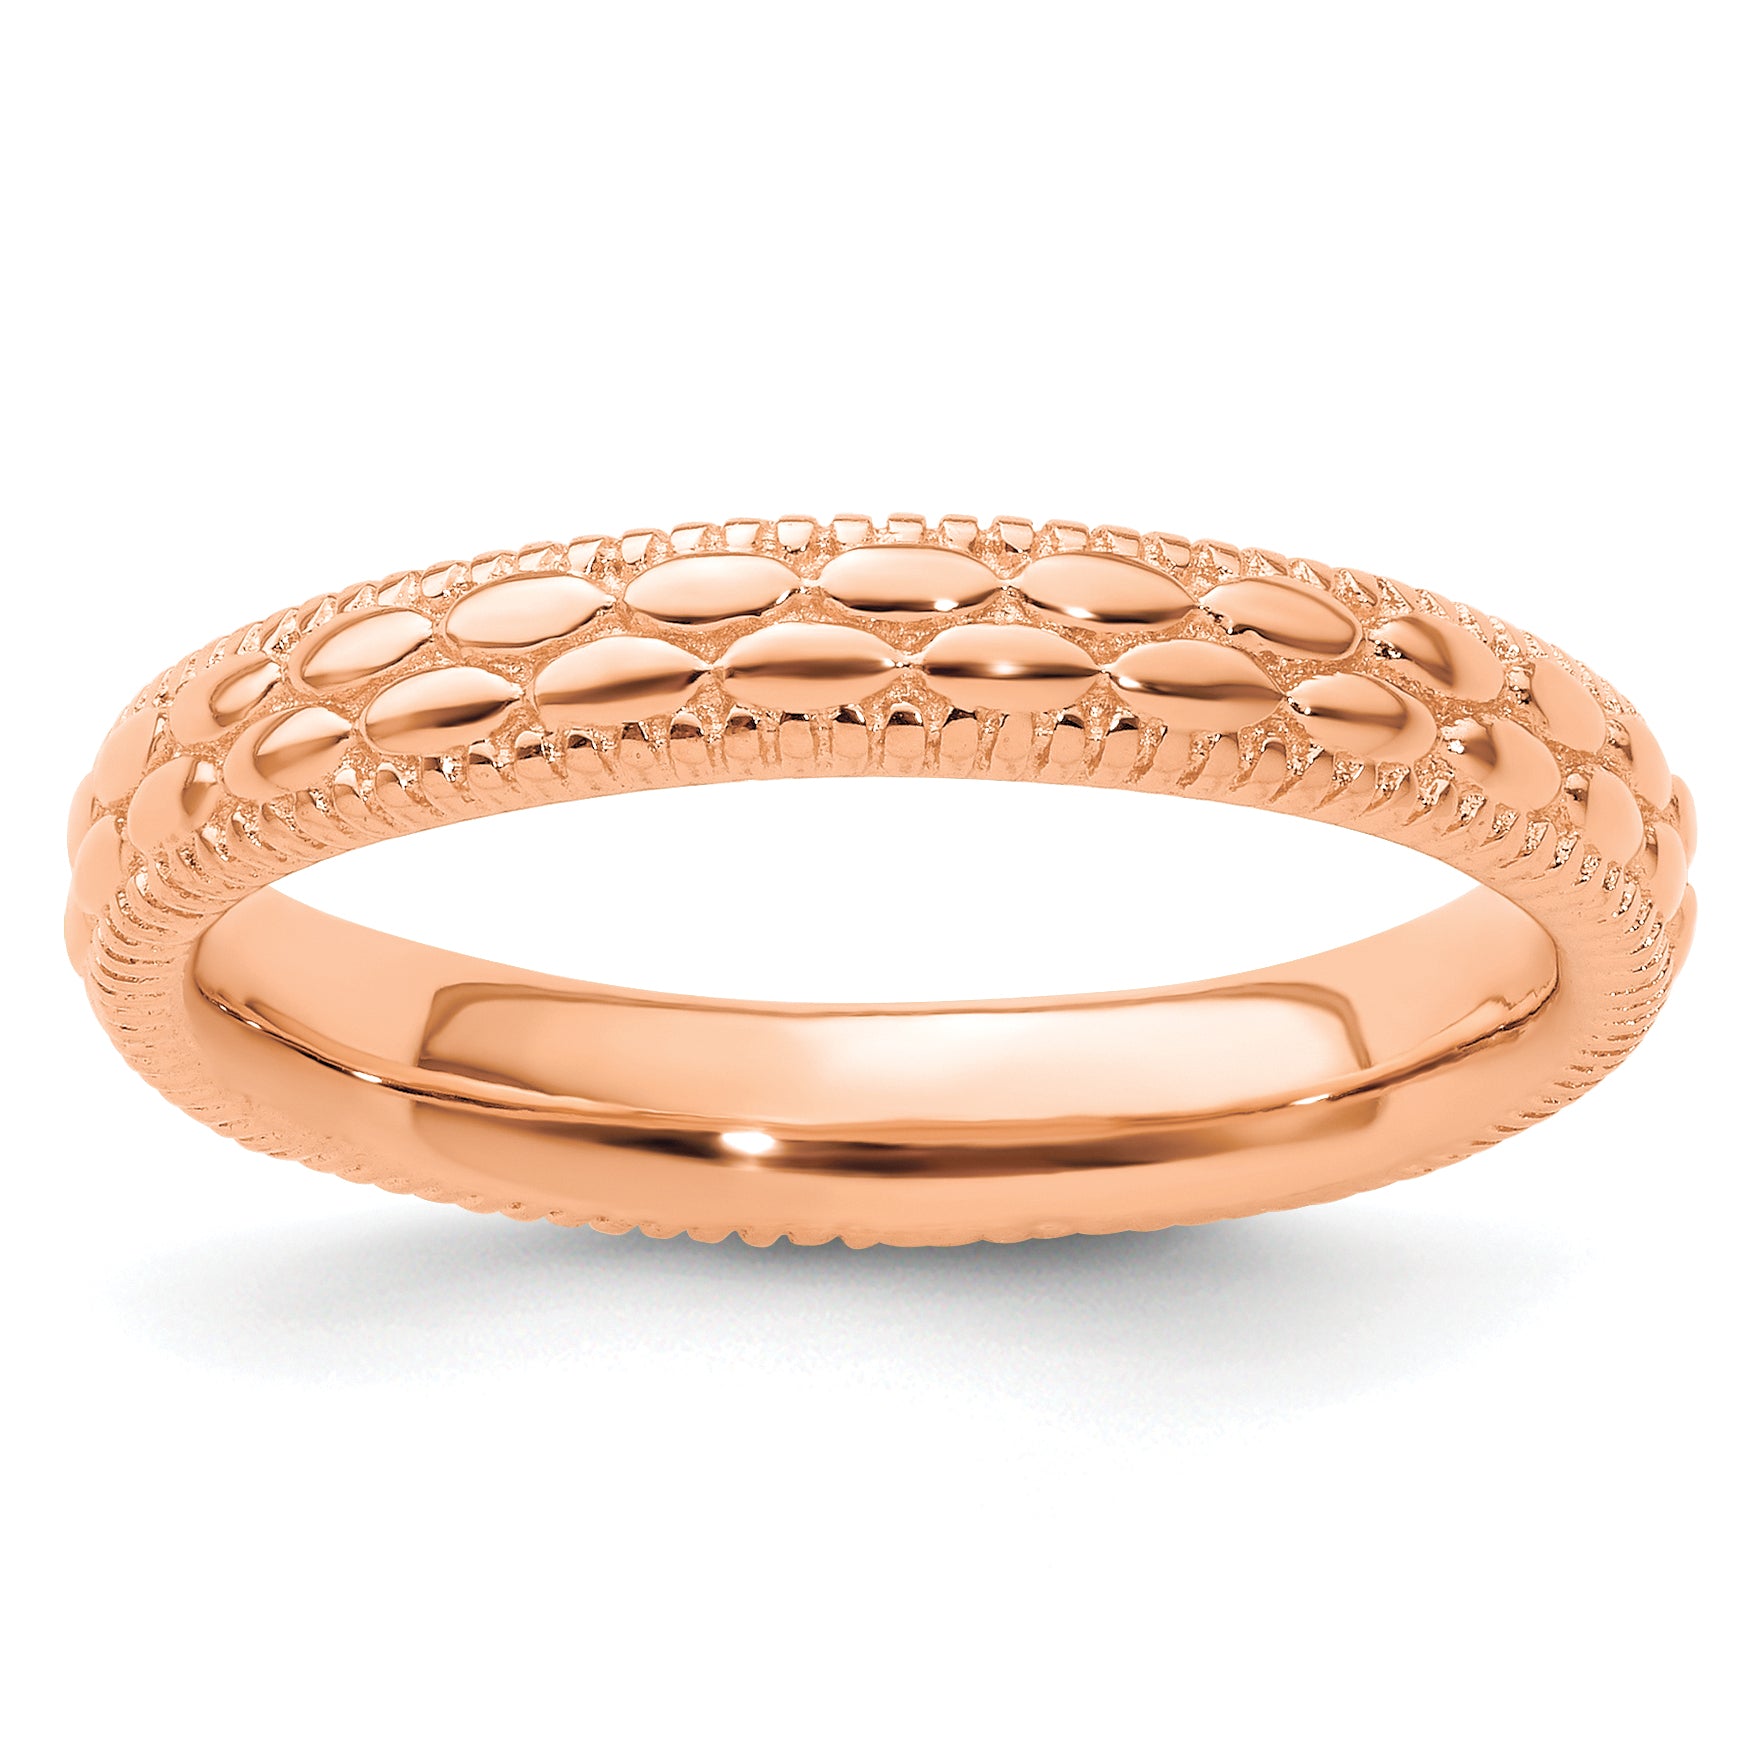 Sterling Silver Stackable Expressions Rose Gold-plated Patterned Ring